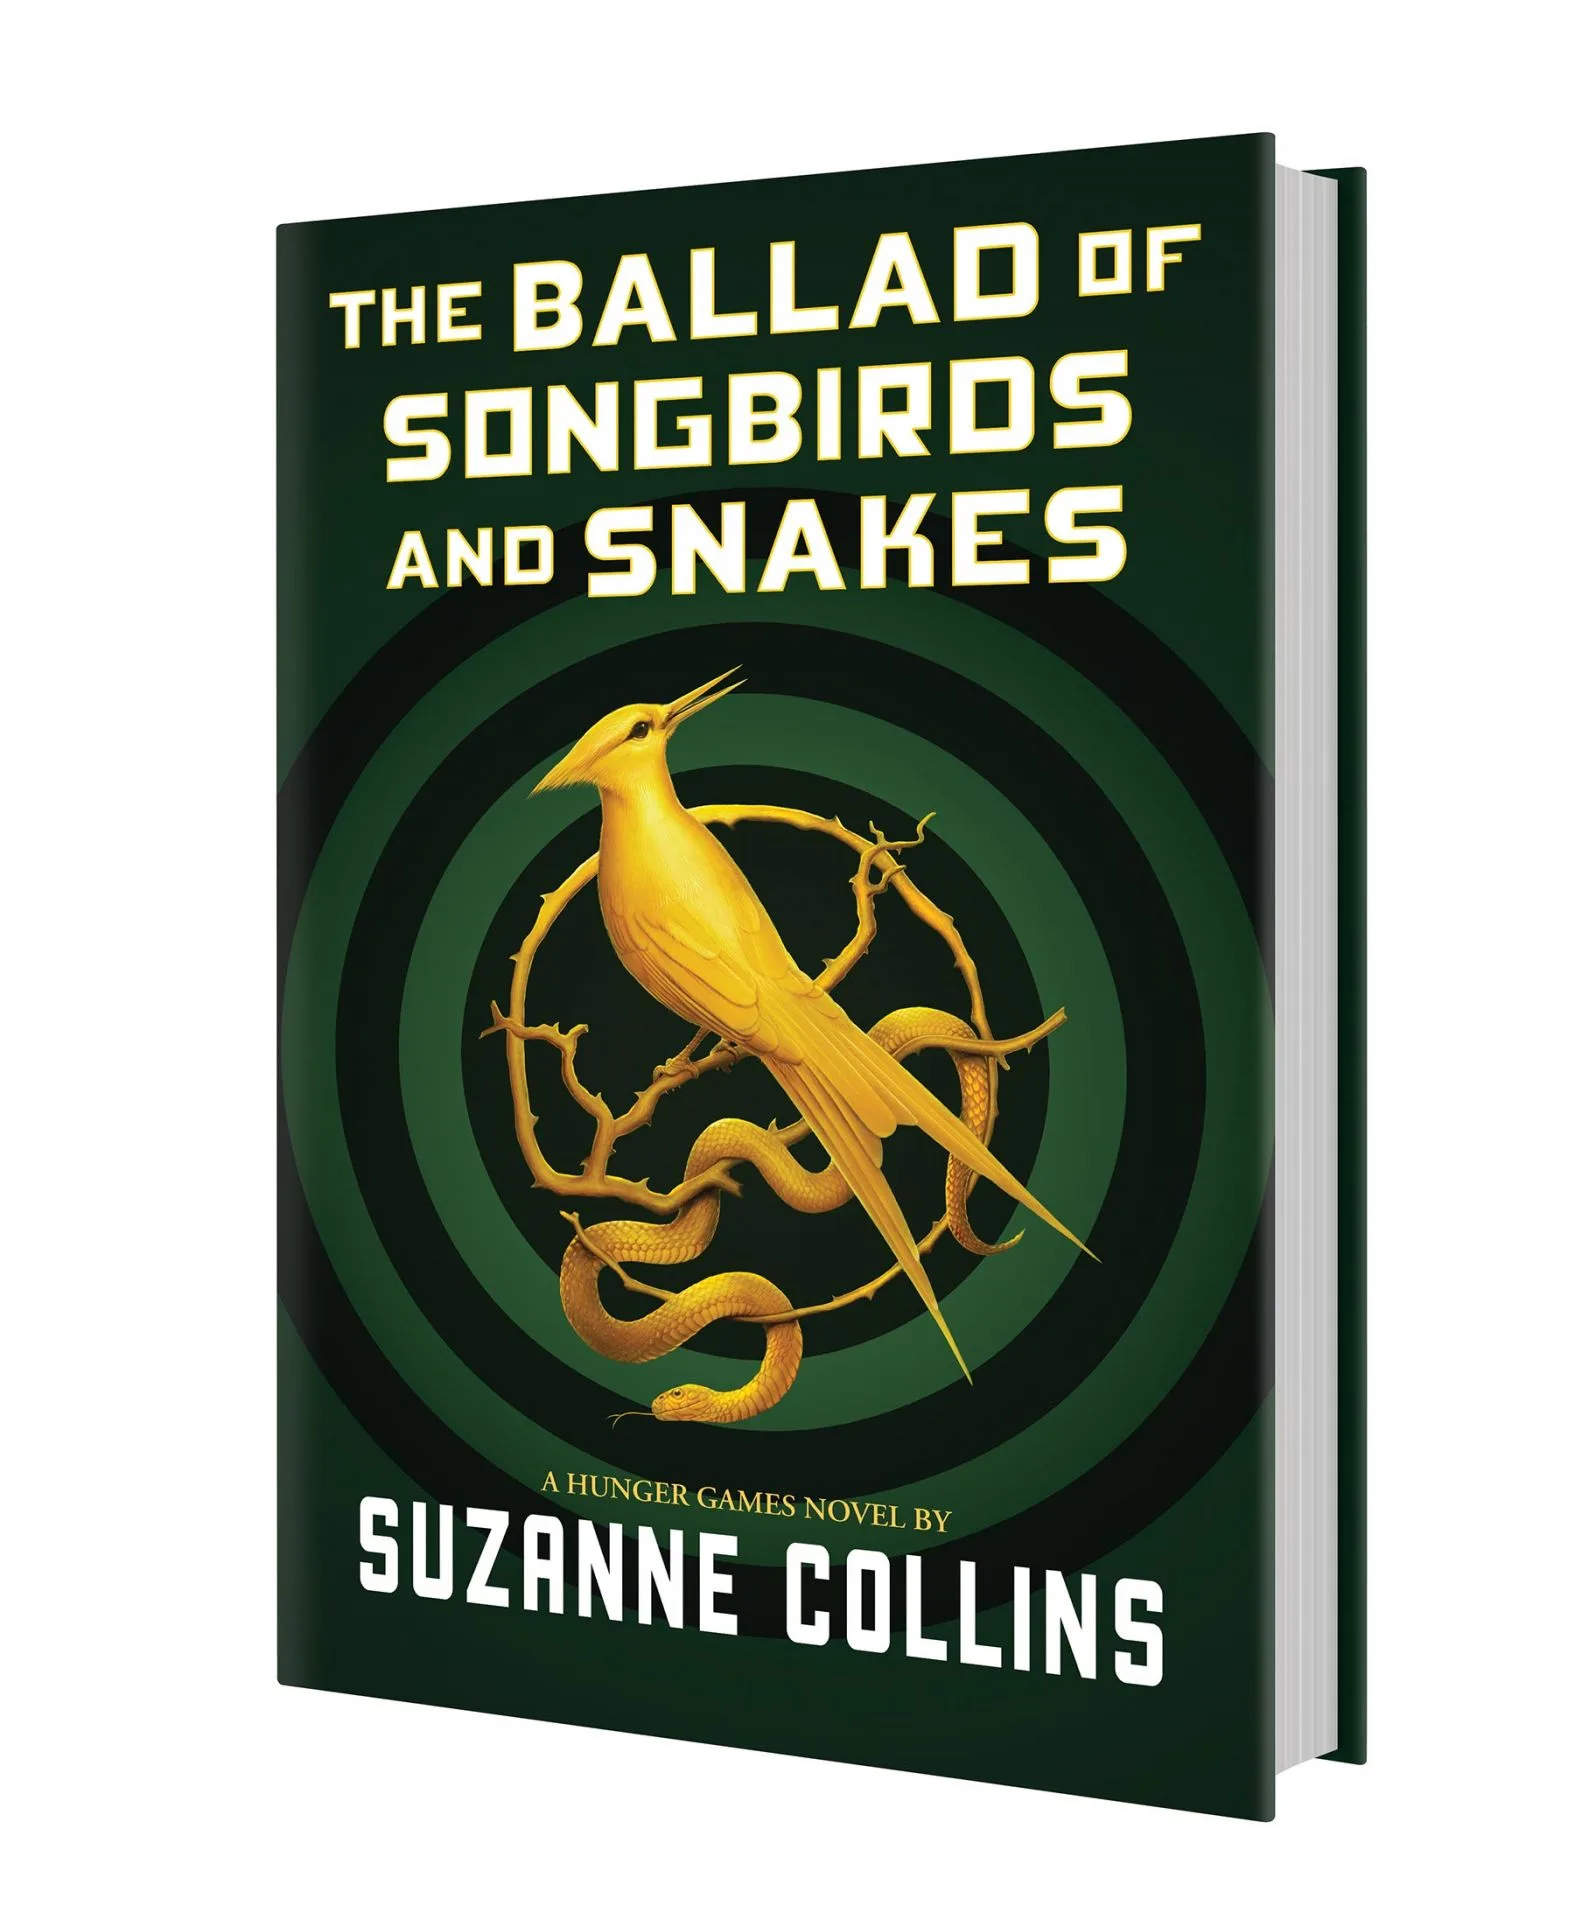 Jogos Vorazes - The Ballad of Songbirds and Snakes